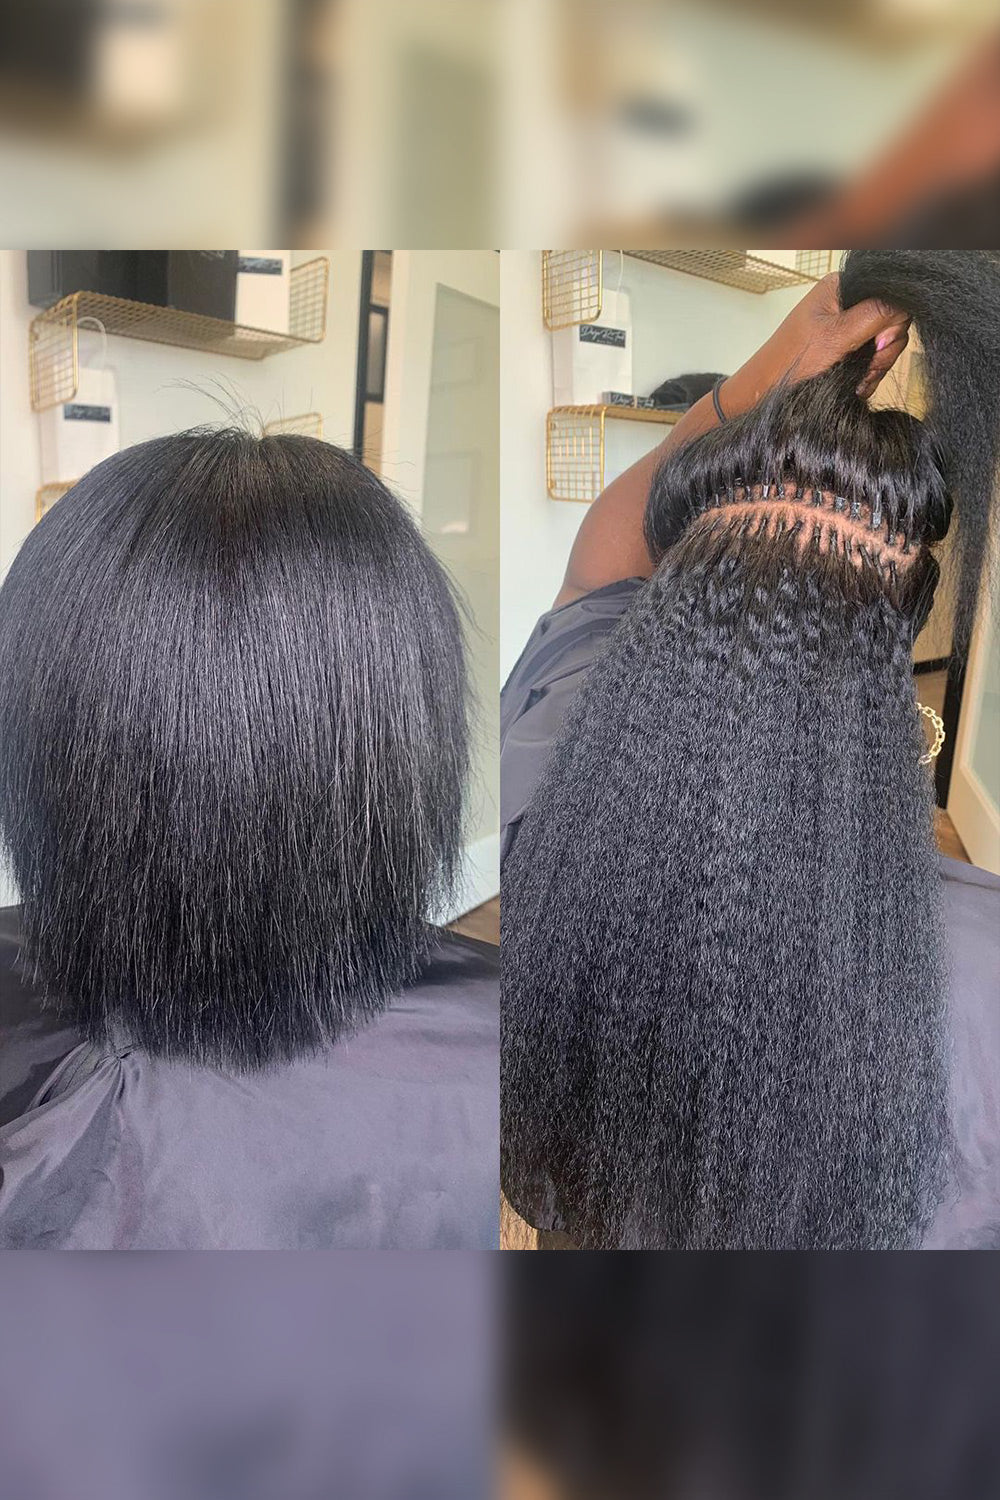 AFFORDABLE CLIP-IN HAIR EXTENSIONS FOR BLACK WOMEN - YouTube